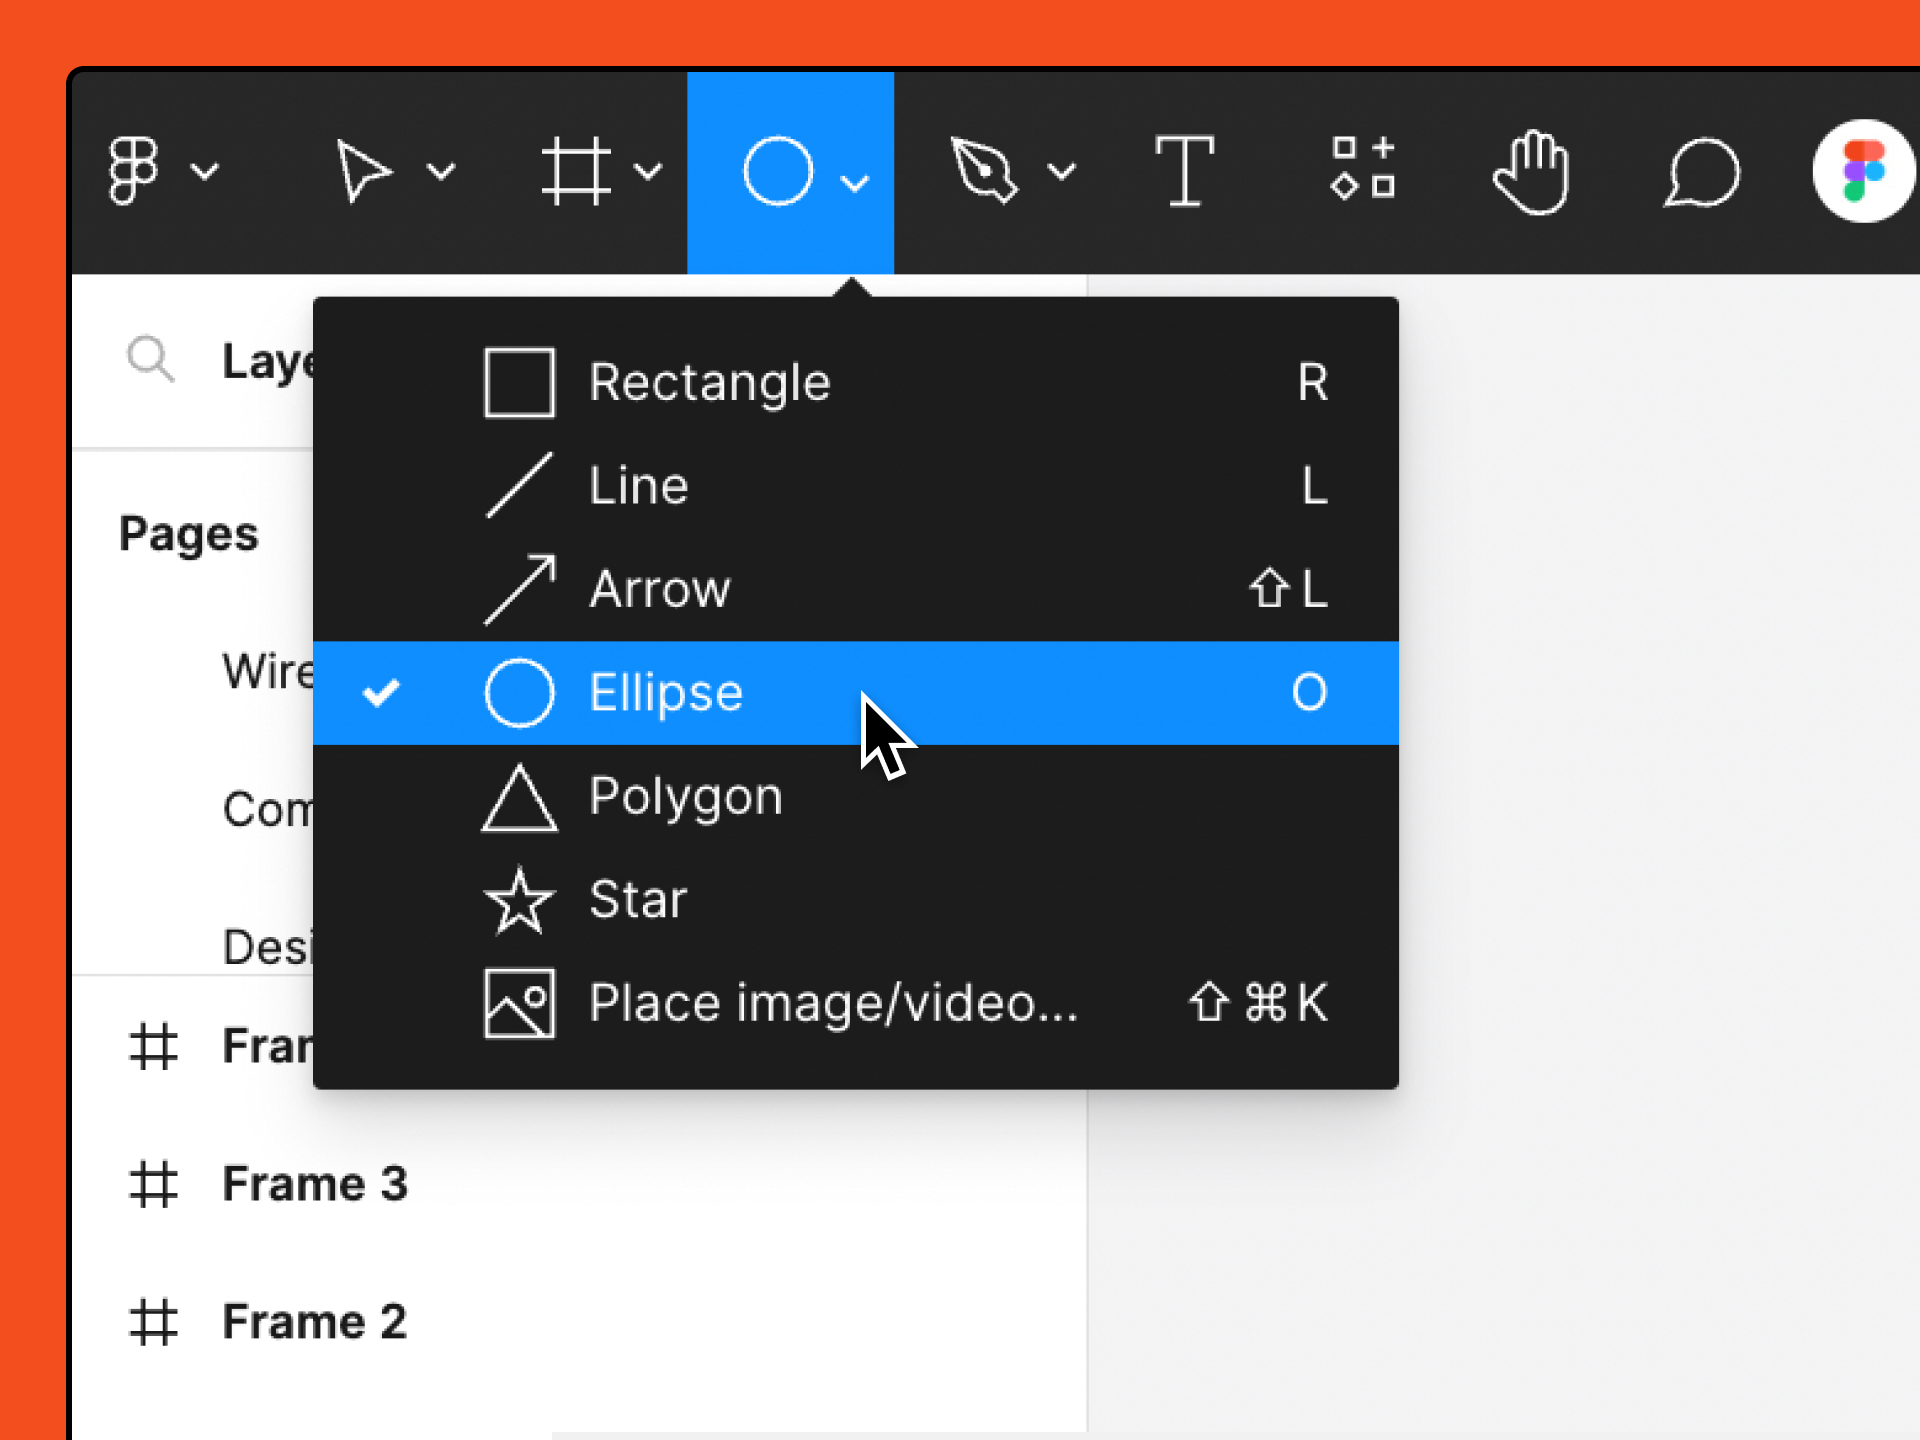 A Figma file. From the top tool bar, the Ellipses (circle) icon is selected.